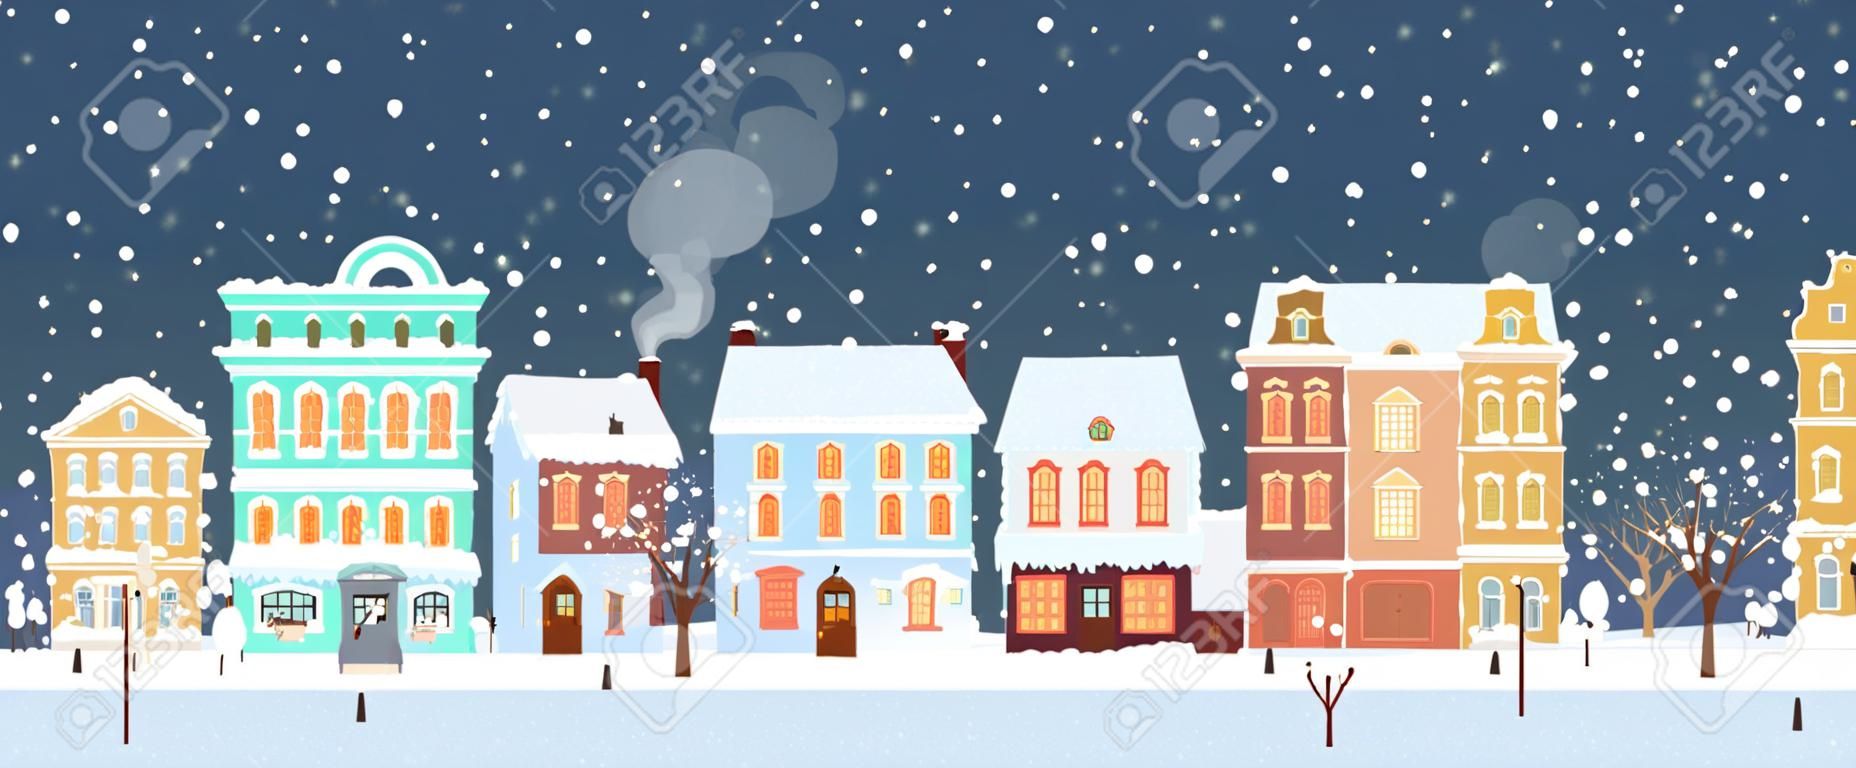 Snowy night in cozy town city panorama. Winter village landscape